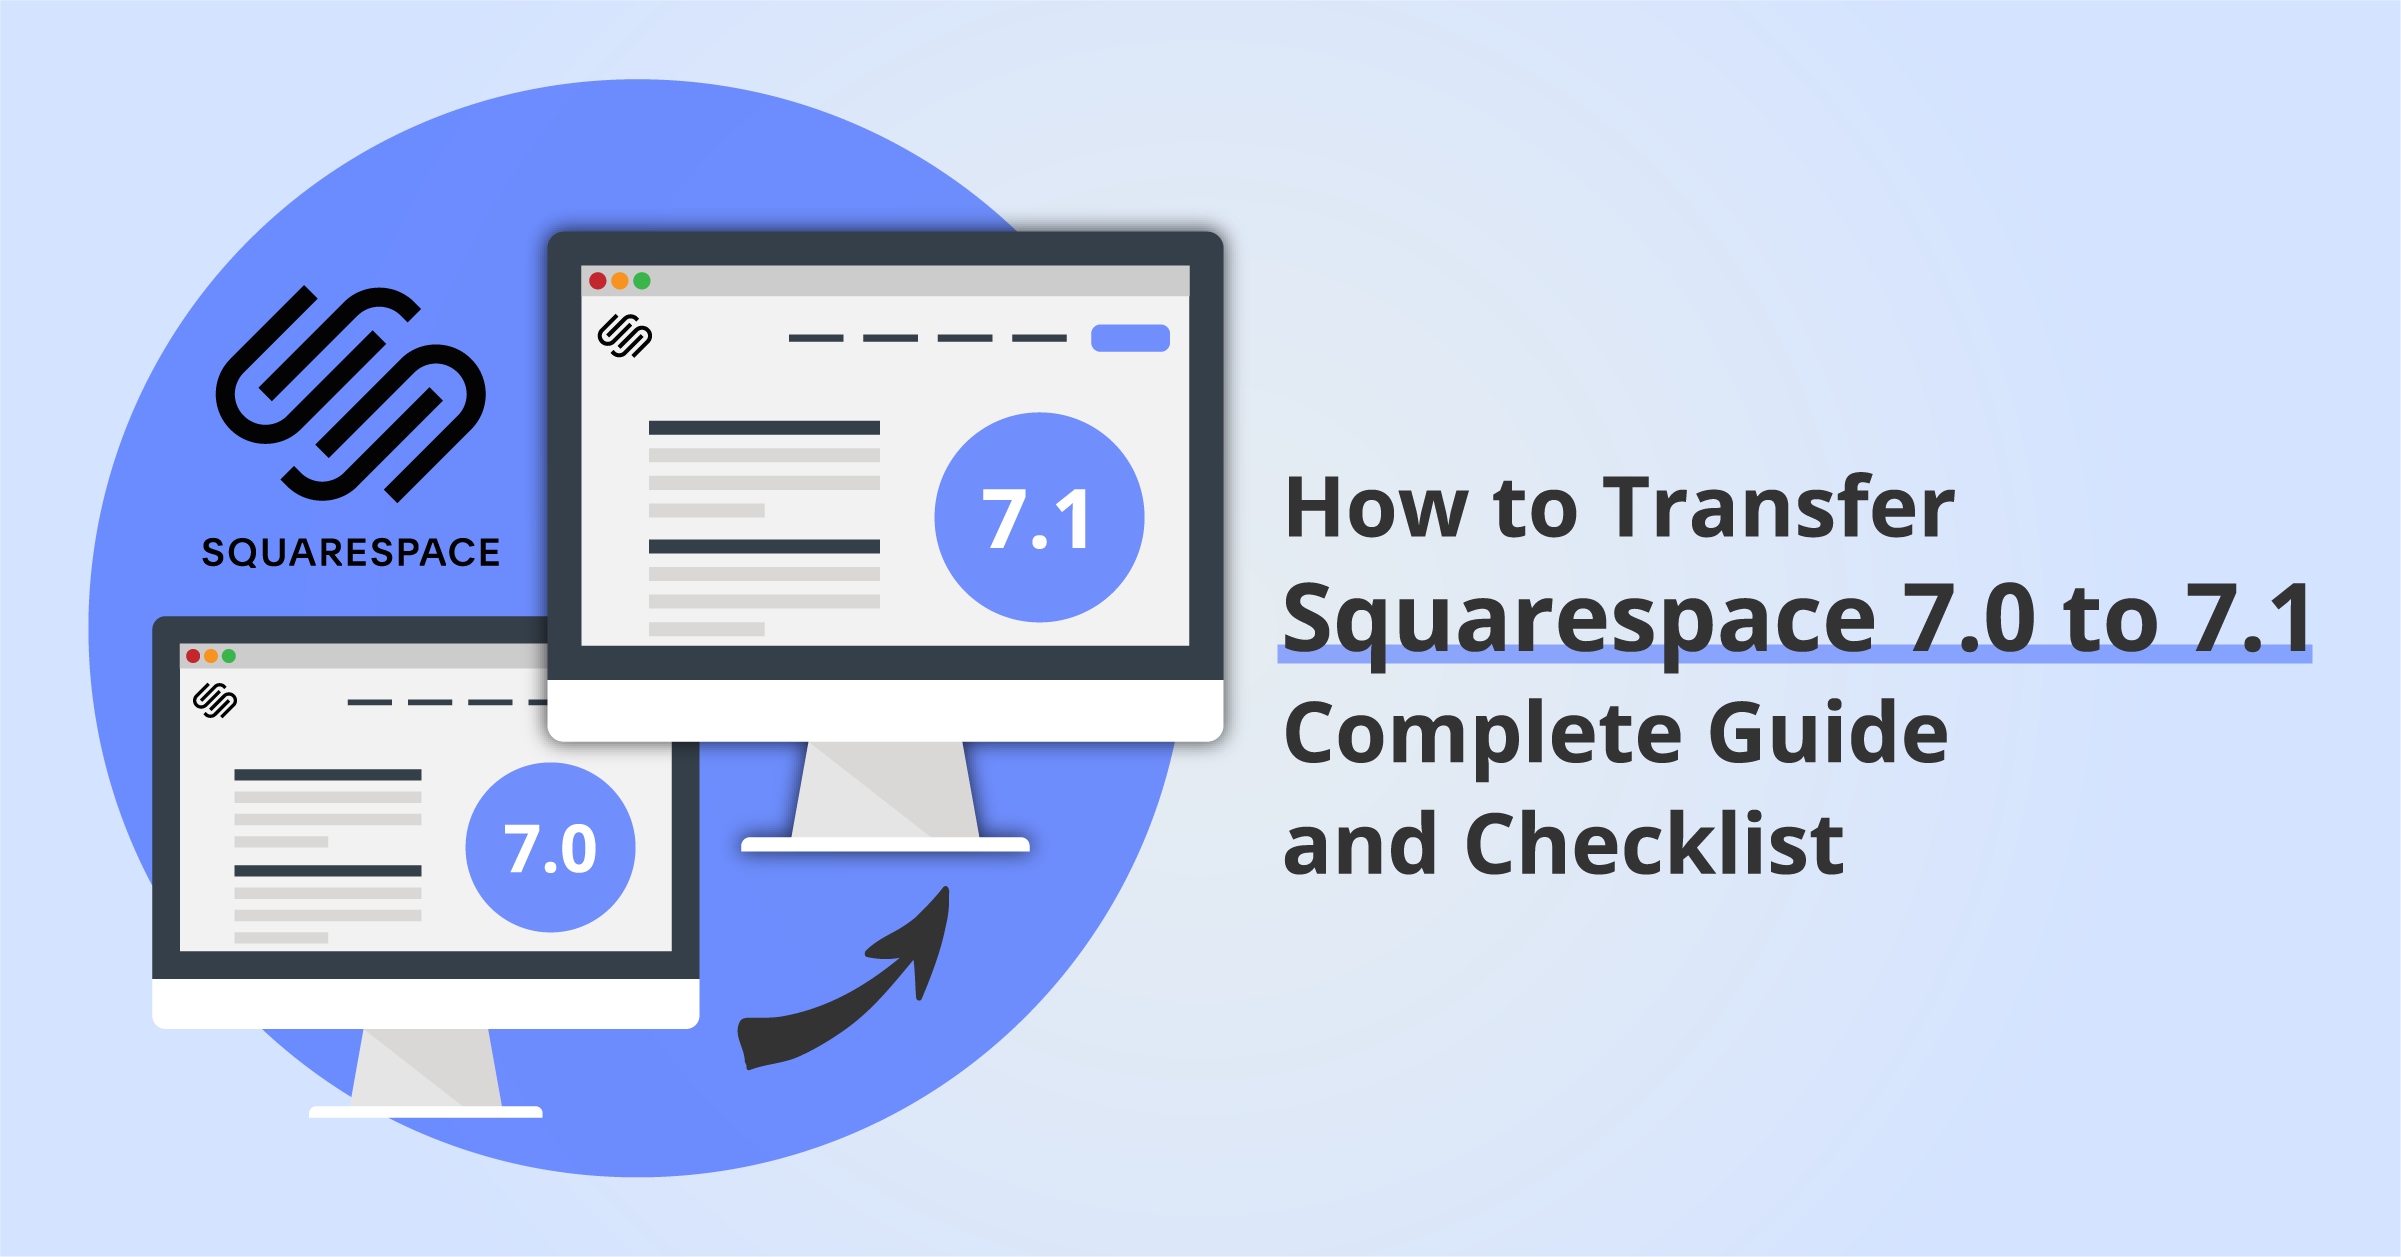 How to Transfer Squarespace 7.0 to 7.1: Complete Guide and Checklist